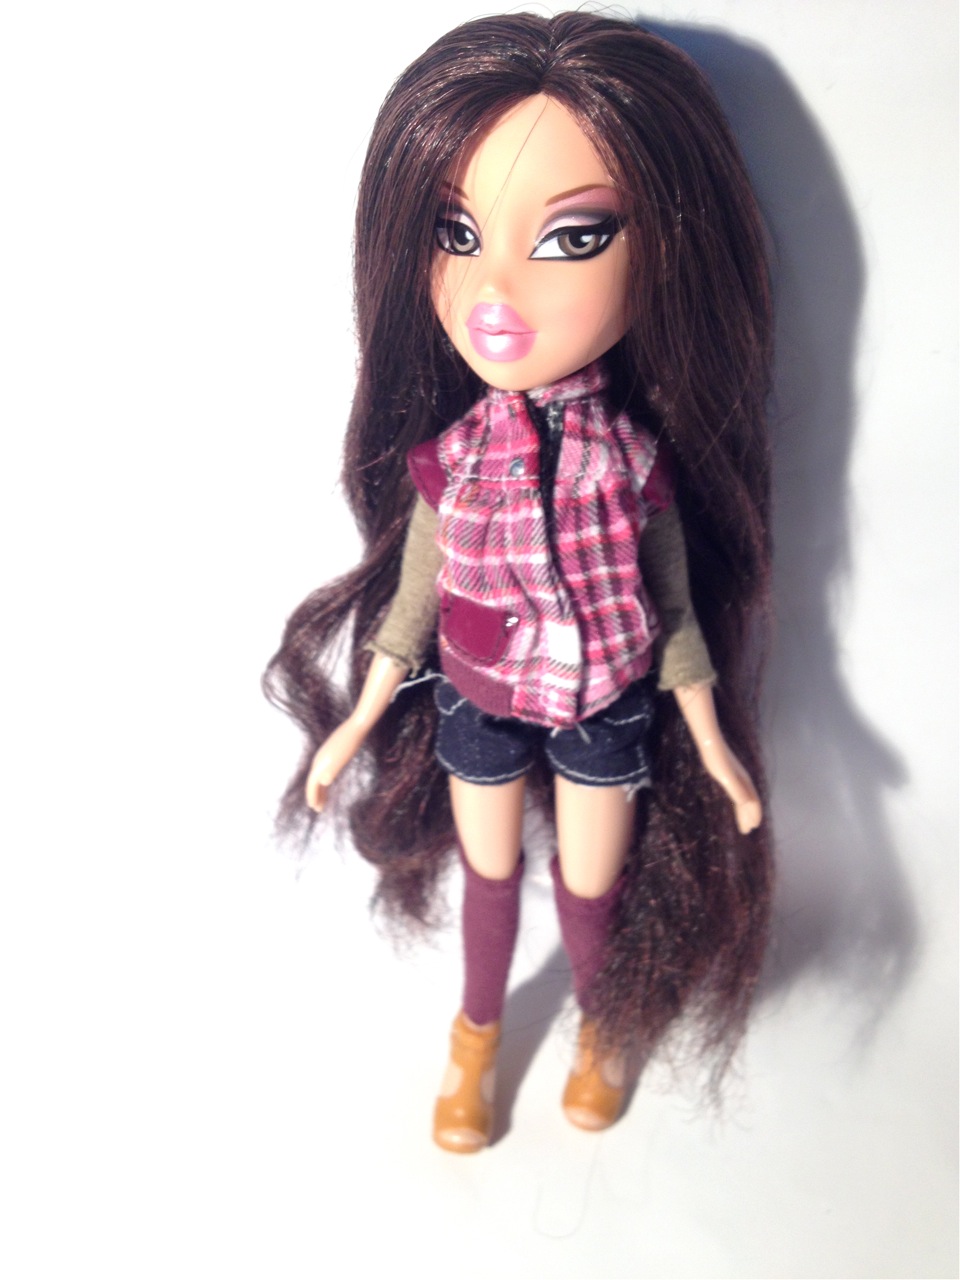 For the next doll, I’ll be looking at one of the most memorable lines of al...